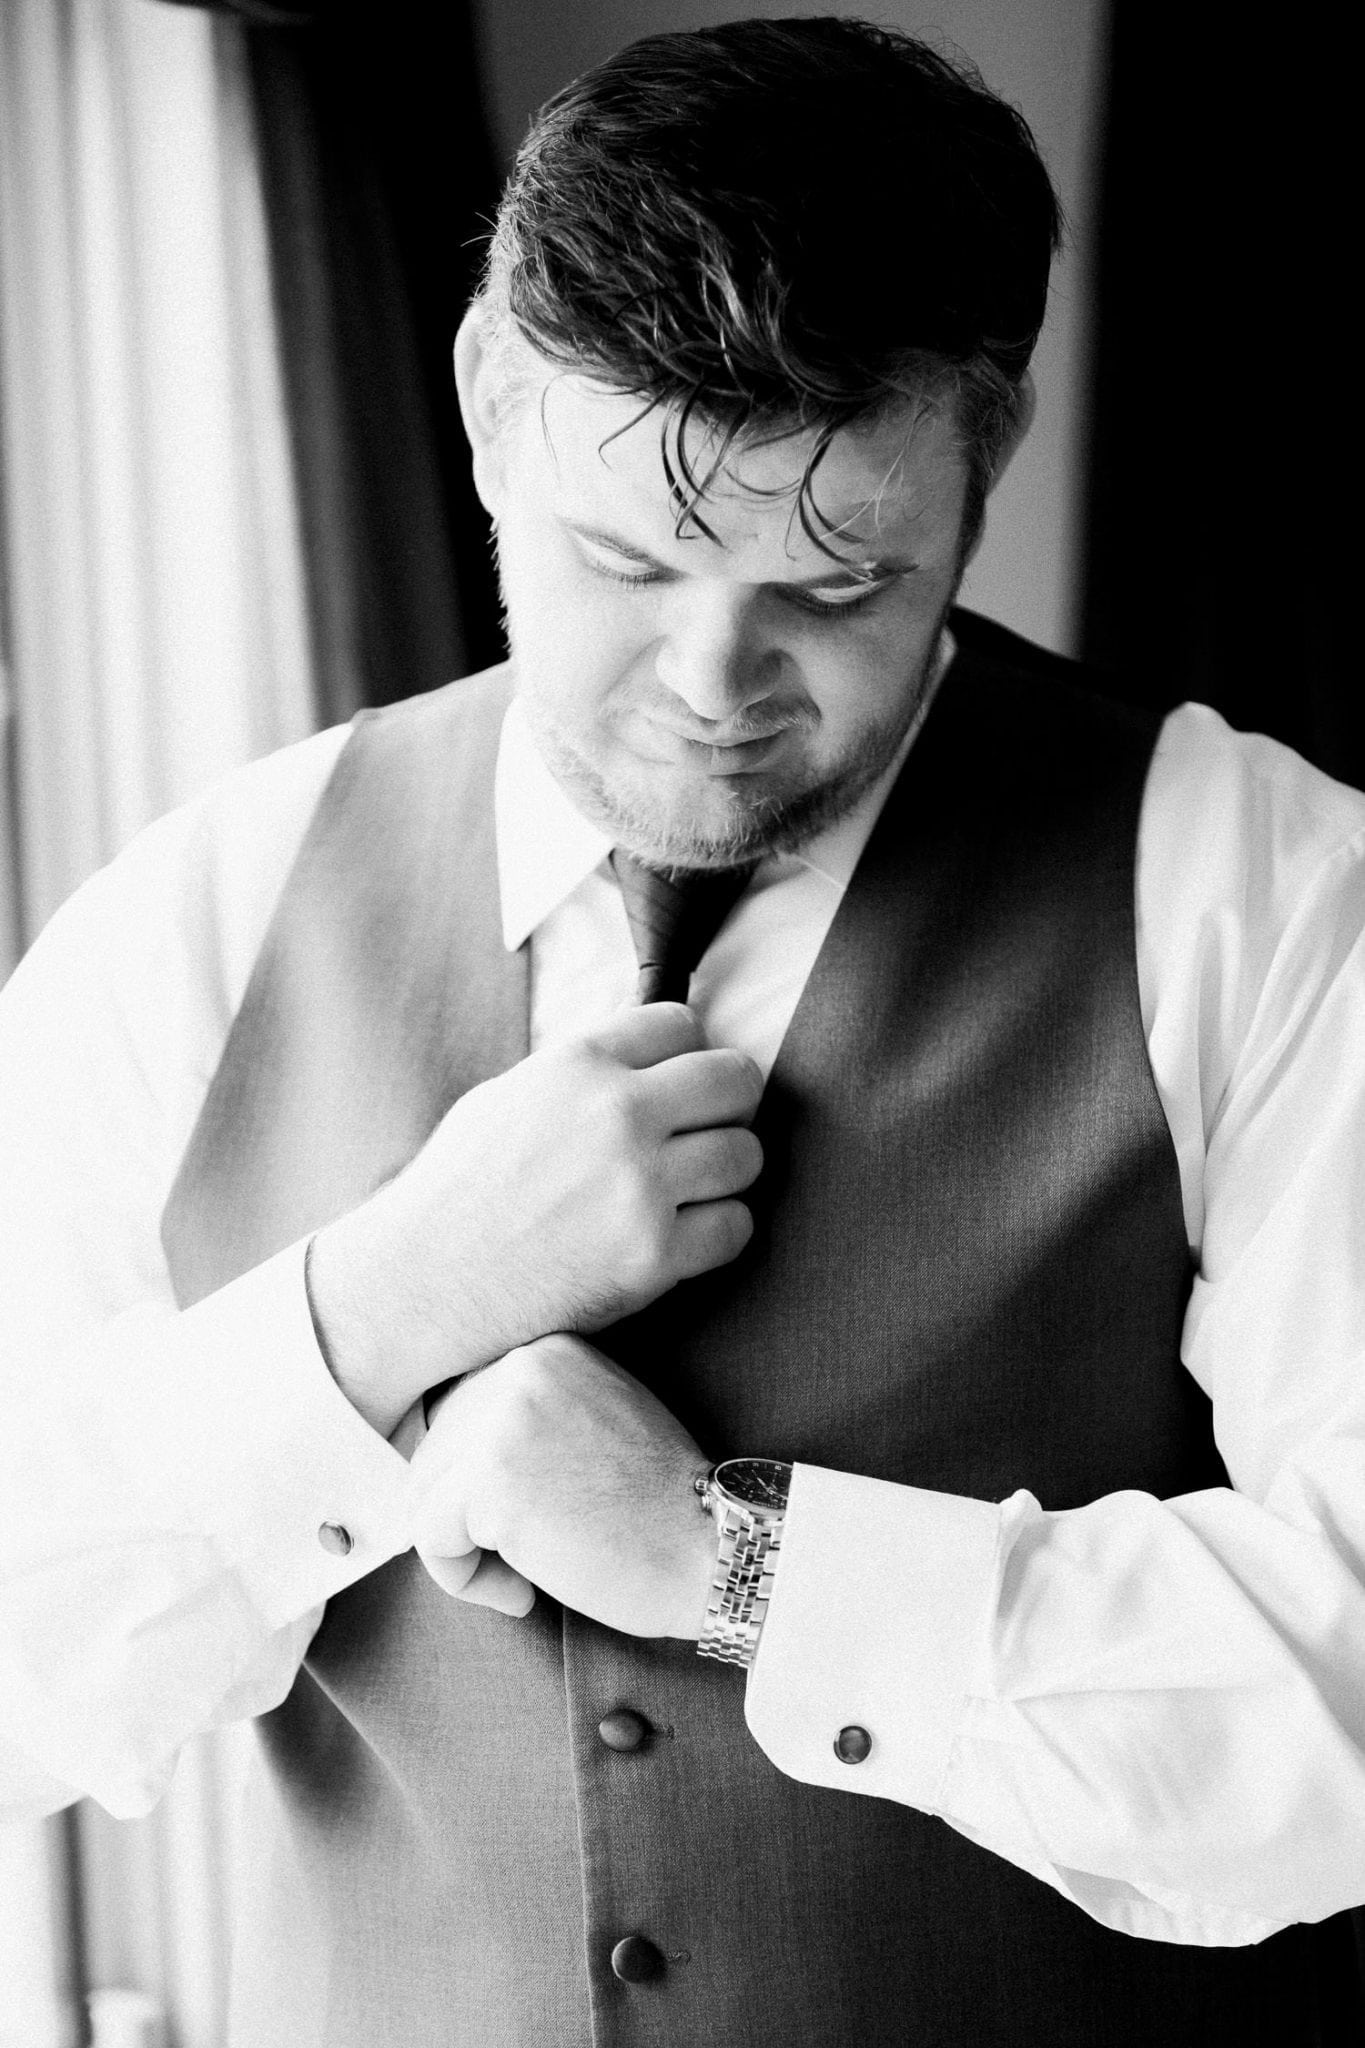 Groom during morning prep in b/w | Vancouver wedding photographer